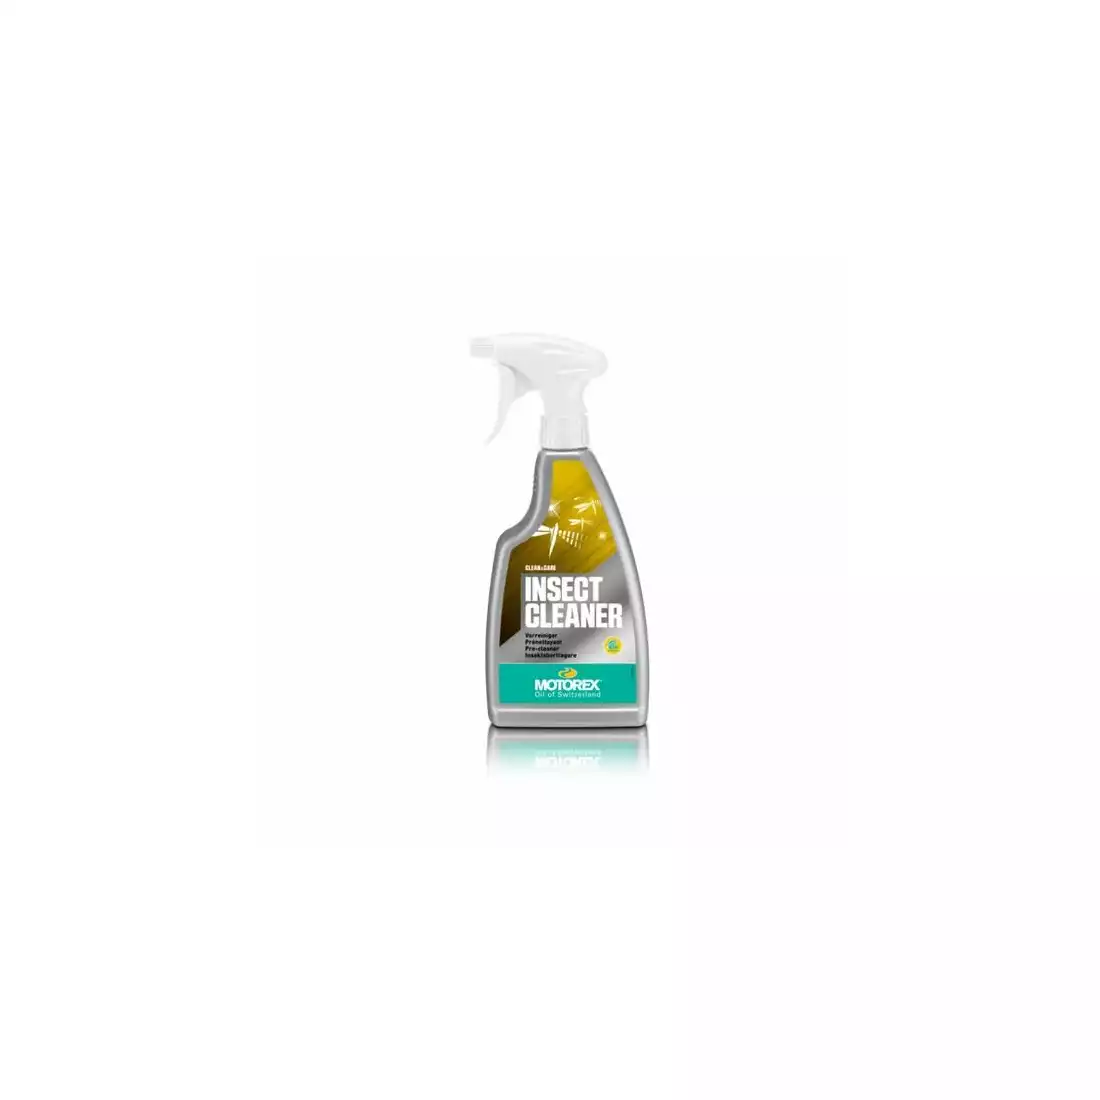 MOTOREX Insect Cleaner 500ml306234